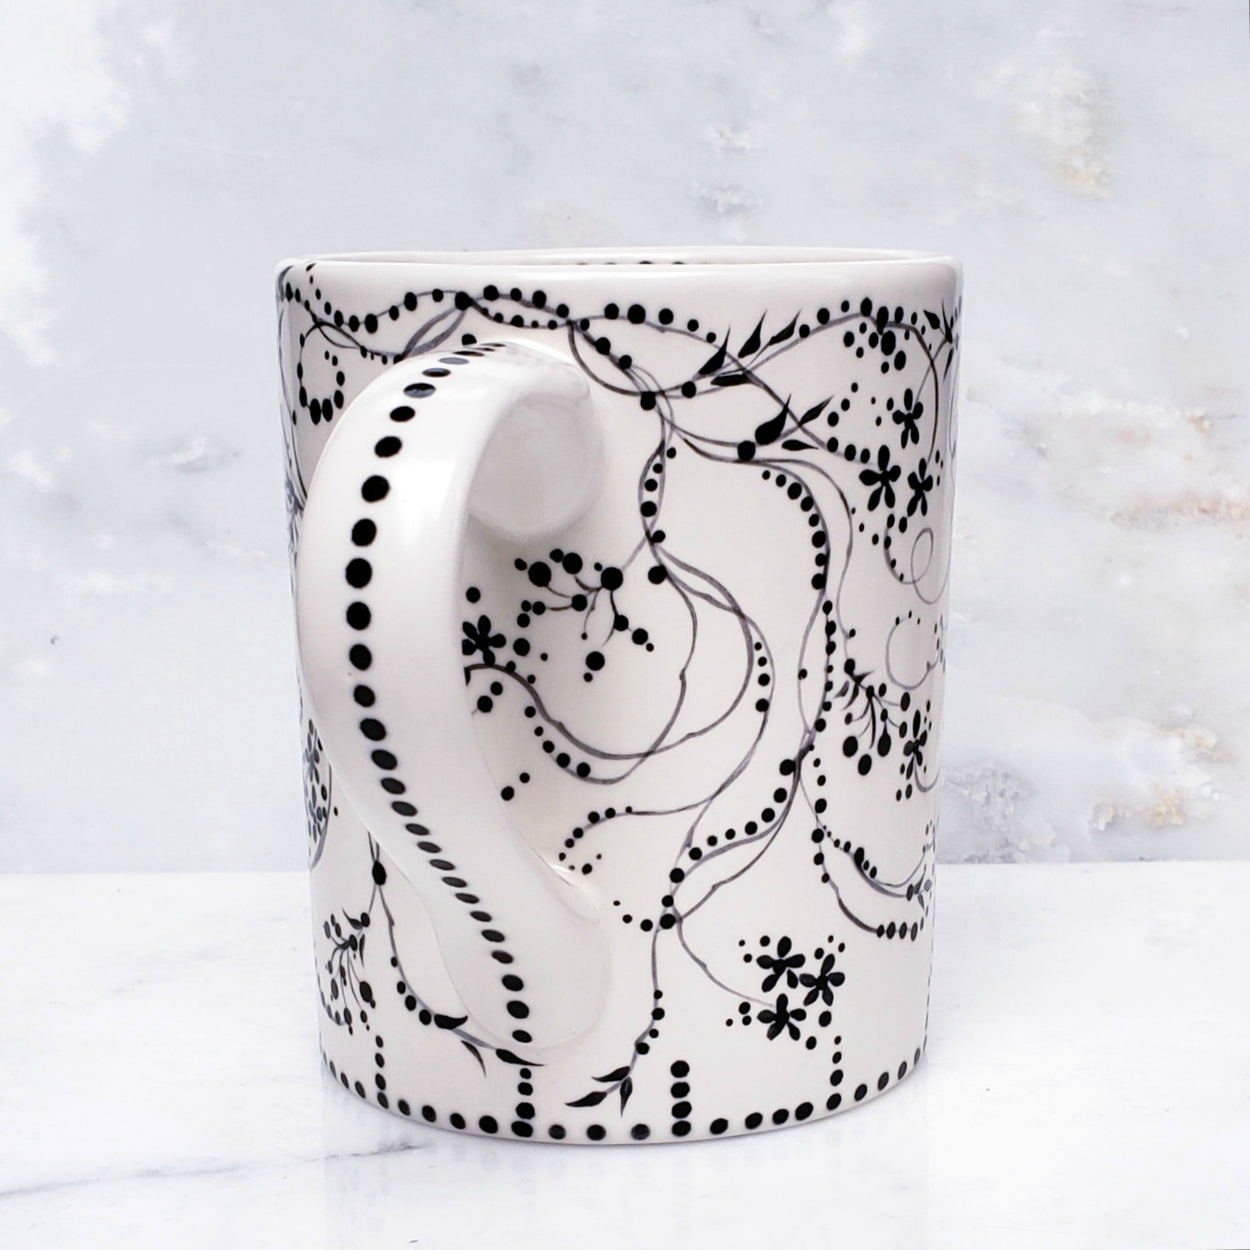 Beautiful black and white mug with vintage inspired design.. tiny flowers and vines encircle the mug with the sweetest polka dots as acents. 16 oz ceramic kiln fired mug